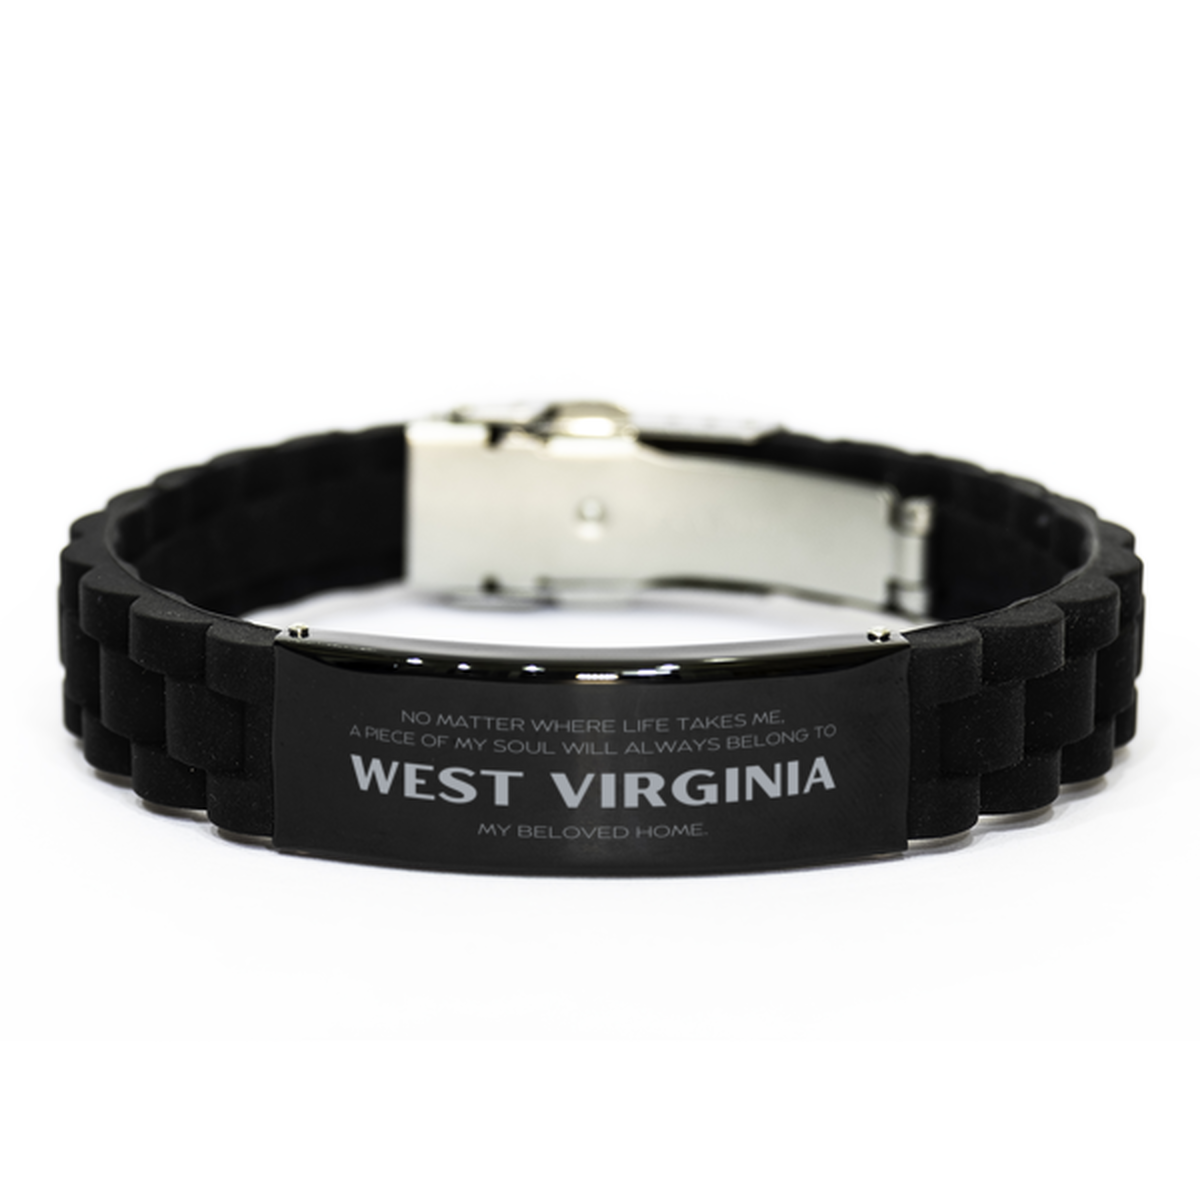 Love West Virginia State Gifts, My soul will always belong to West Virginia, Proud Black Glidelock Clasp Bracelet, Birthday Unique Gifts For West Virginia Men, Women, Friends